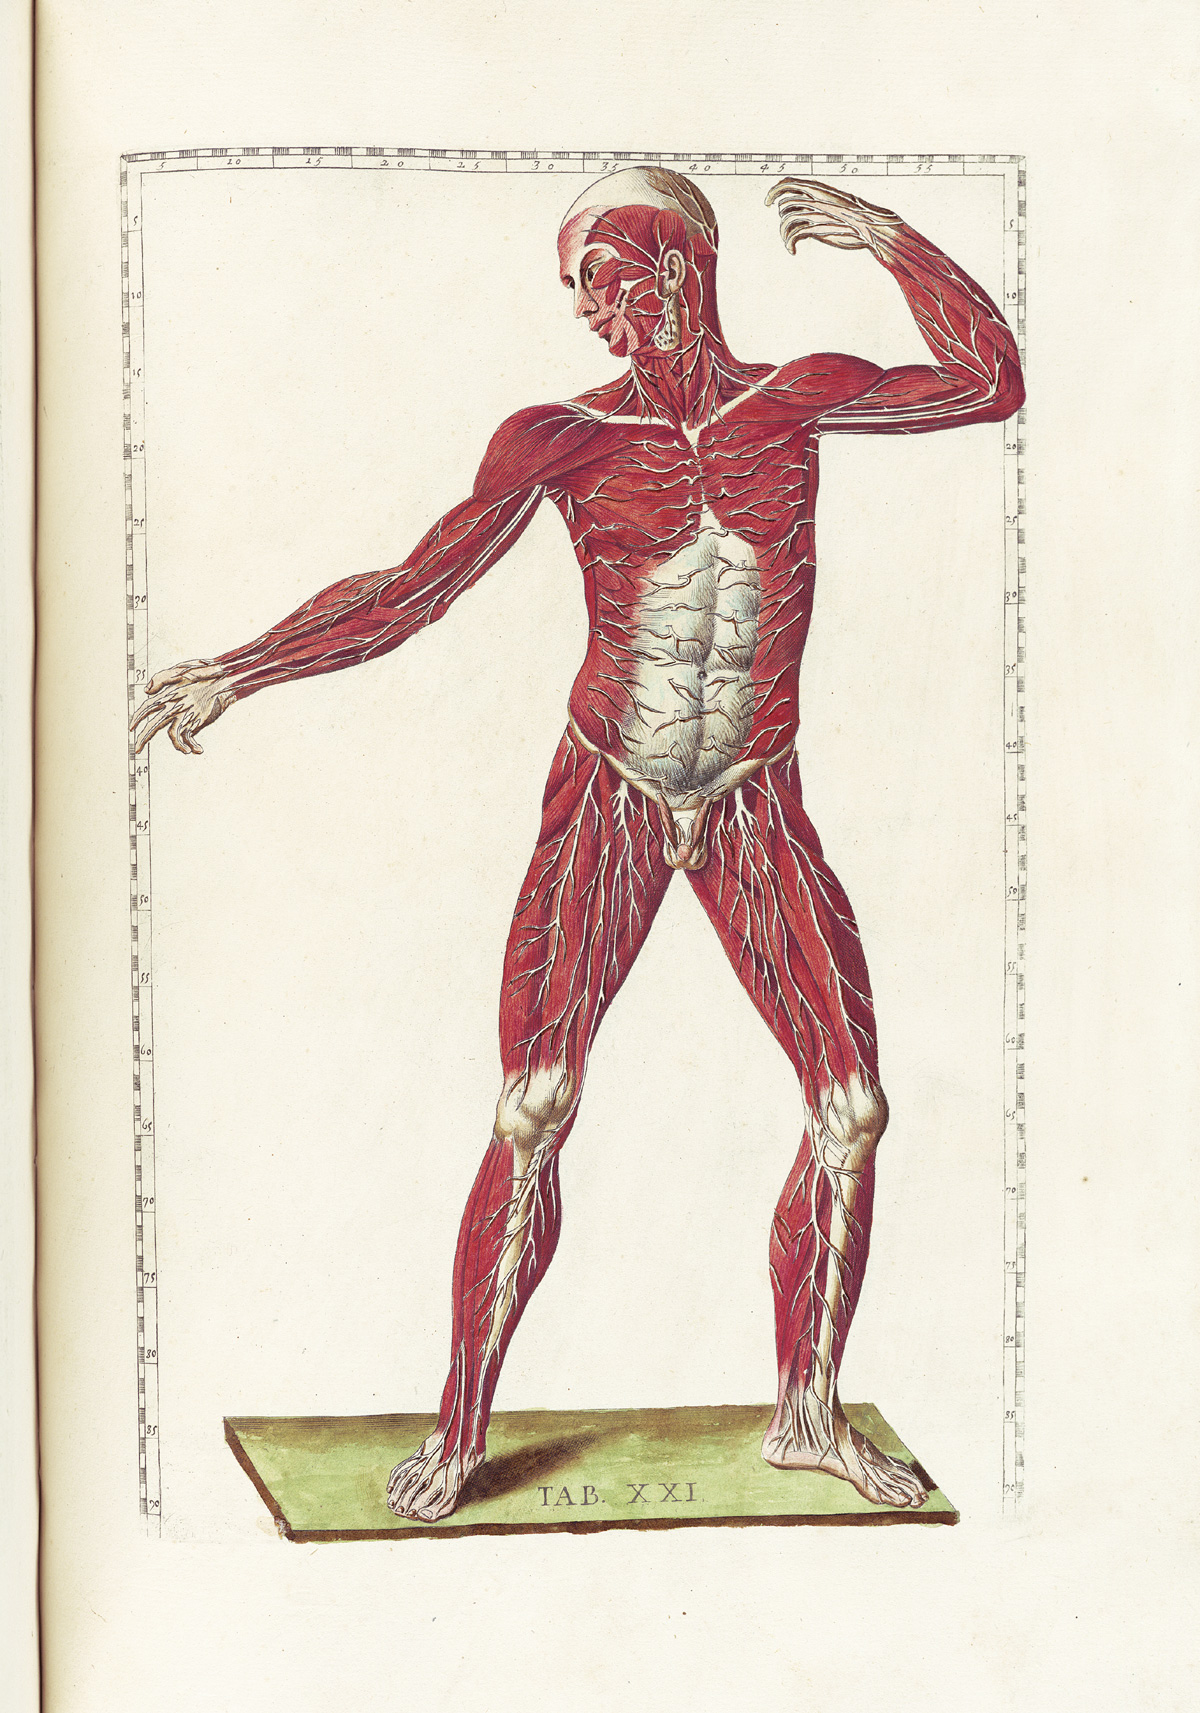 Hand-colored etching of a facing standing figure with flesh removed to expose the muscles showing the pathways of the nerves, with emphasis on the nerves just below the skin; the figure is in a classical pose resembling a javelin thrower looking to the left side of the page with his left hand raised and bent at the elbow and right had extended forward; from Bartholomeo Eustachi’s Tabulae anatomicae, NLM Call no.: WZ 260 E87t 1783.